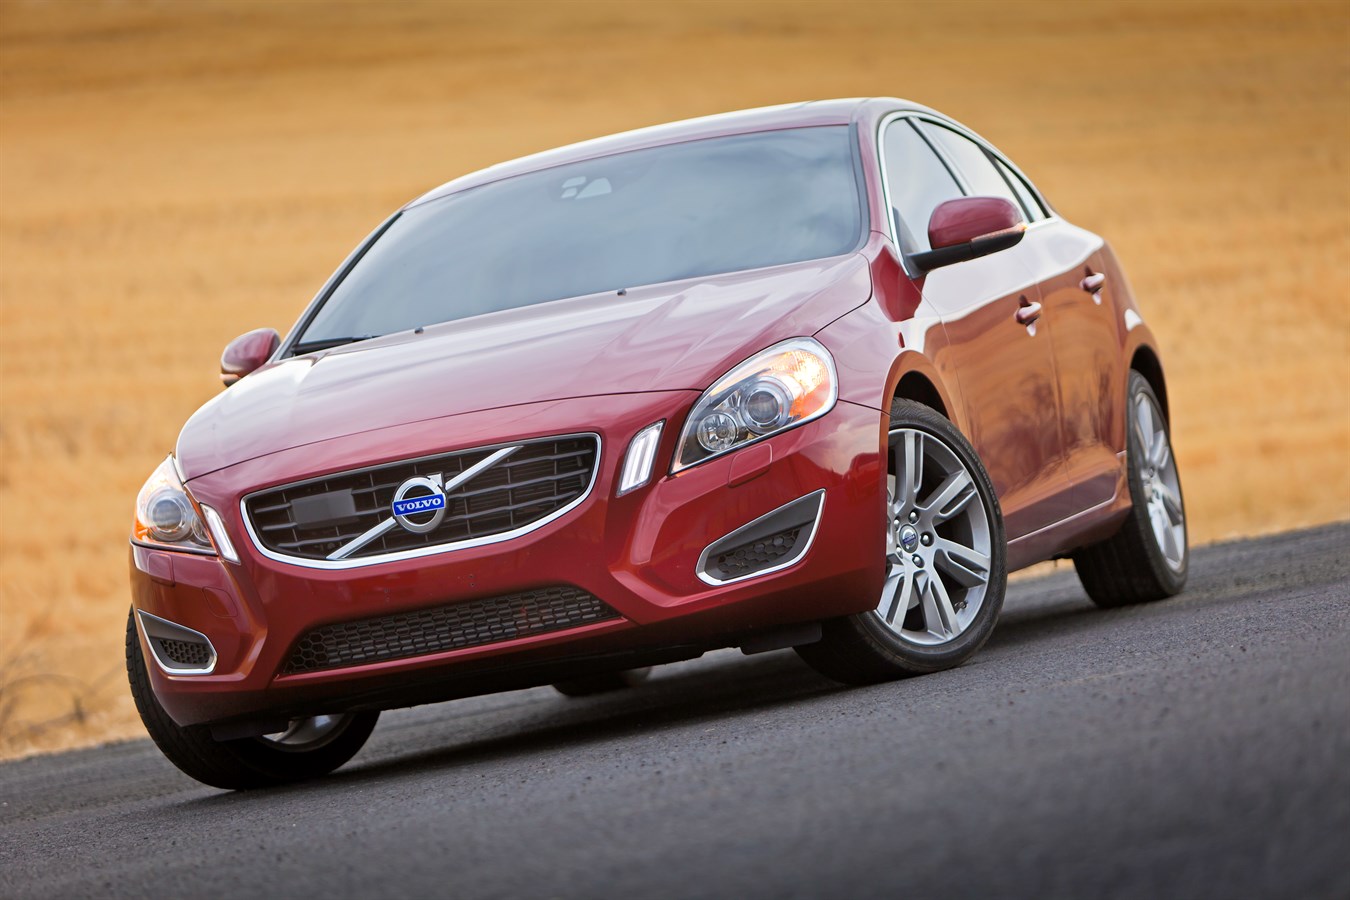 Volvo Announces Reduced Pricing of the 2012 S60 T5 FWD Sport Sedan, 2012 S60  T6 AWD Pricing Remains Unchanged - Volvo Car USA Newsroom